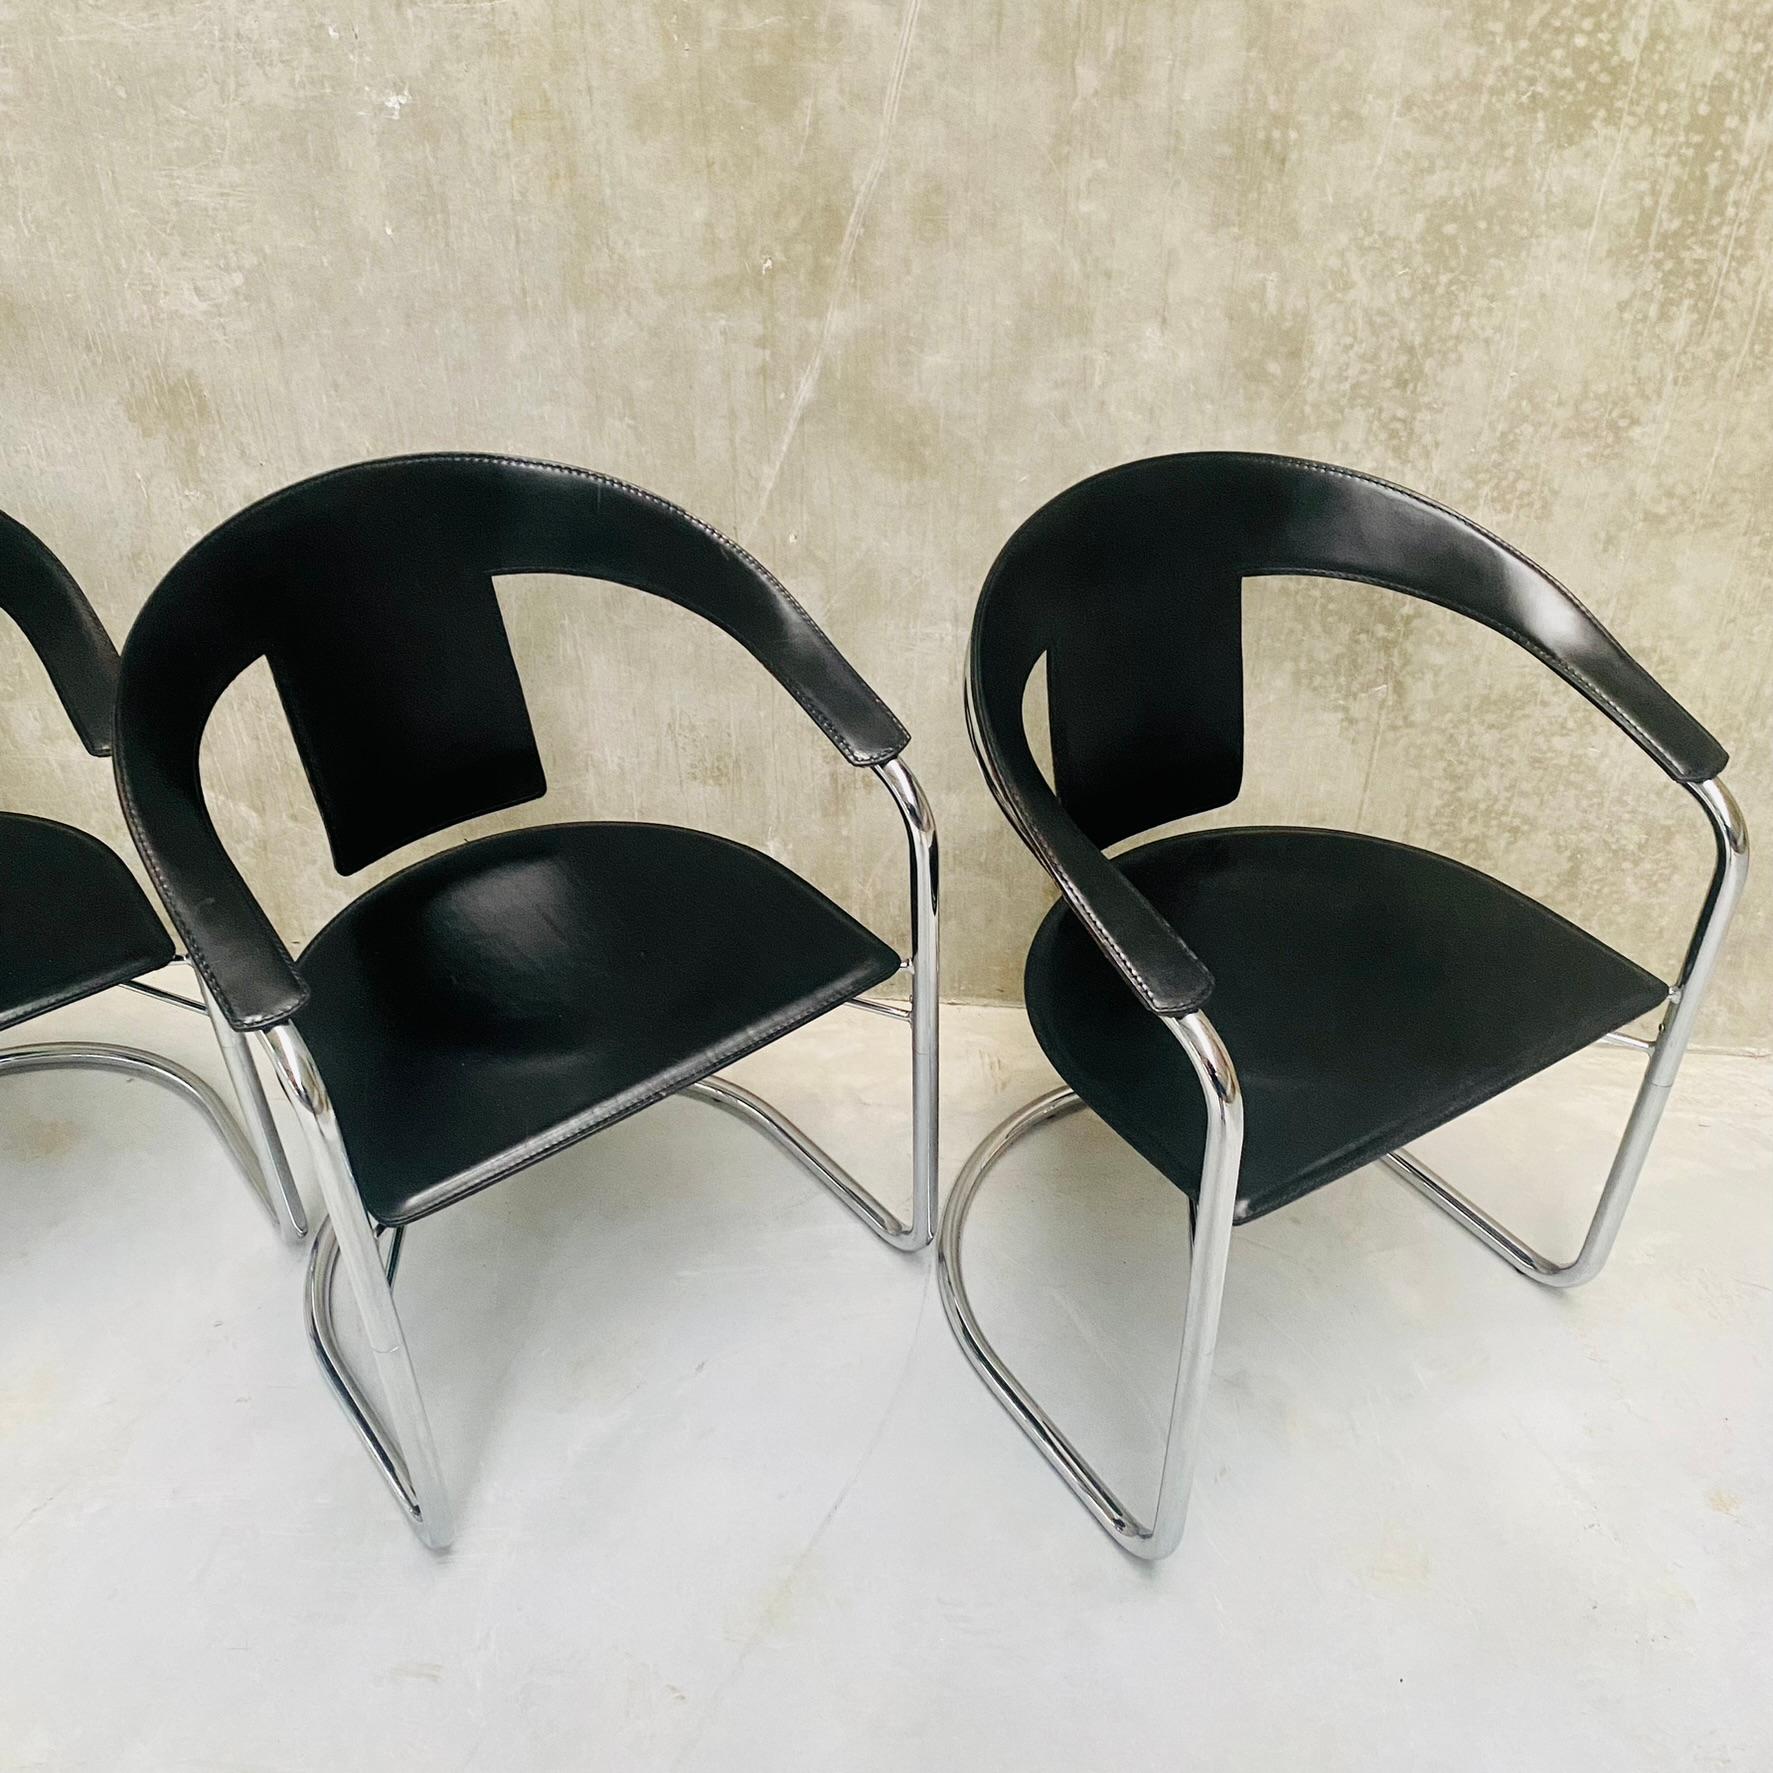 4 x Lo Studio Black Saddle Leather Dining Chairs by A. Rizzatto Italy 1980 6